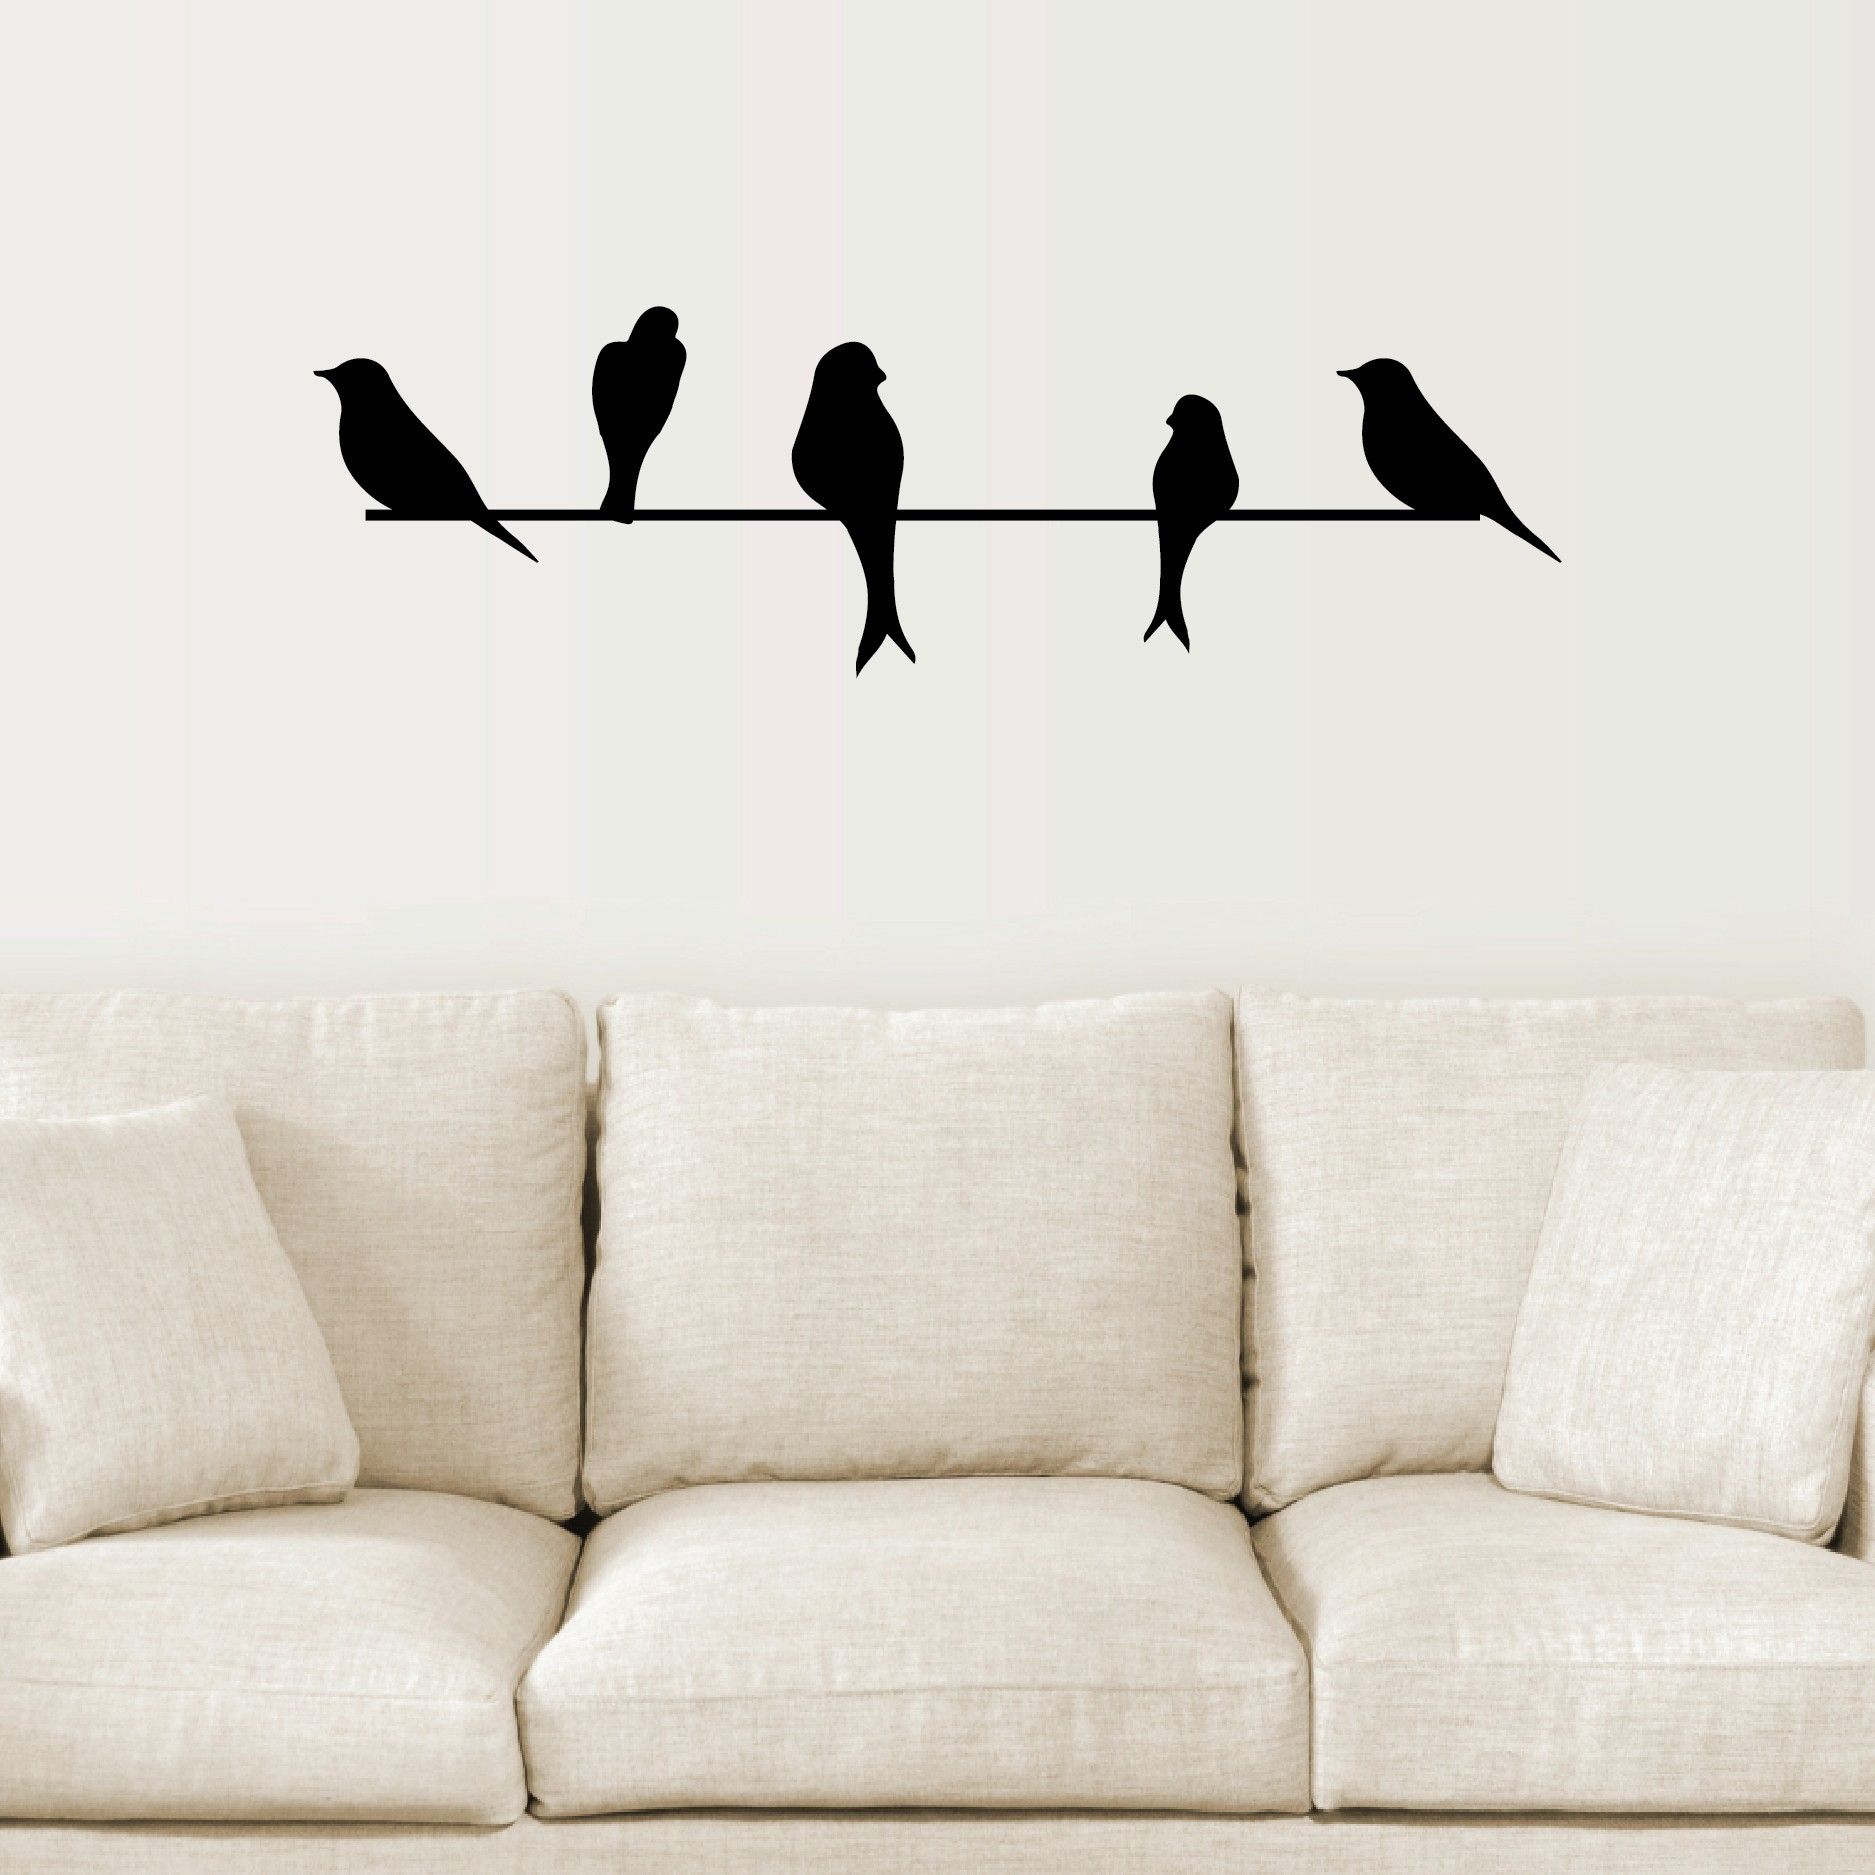 Bird Wall Art Fresh Birds A Wire Takuice Ideas Bright On Canvas For 2017 Birds On A Wire Wall Art (View 1 of 20)